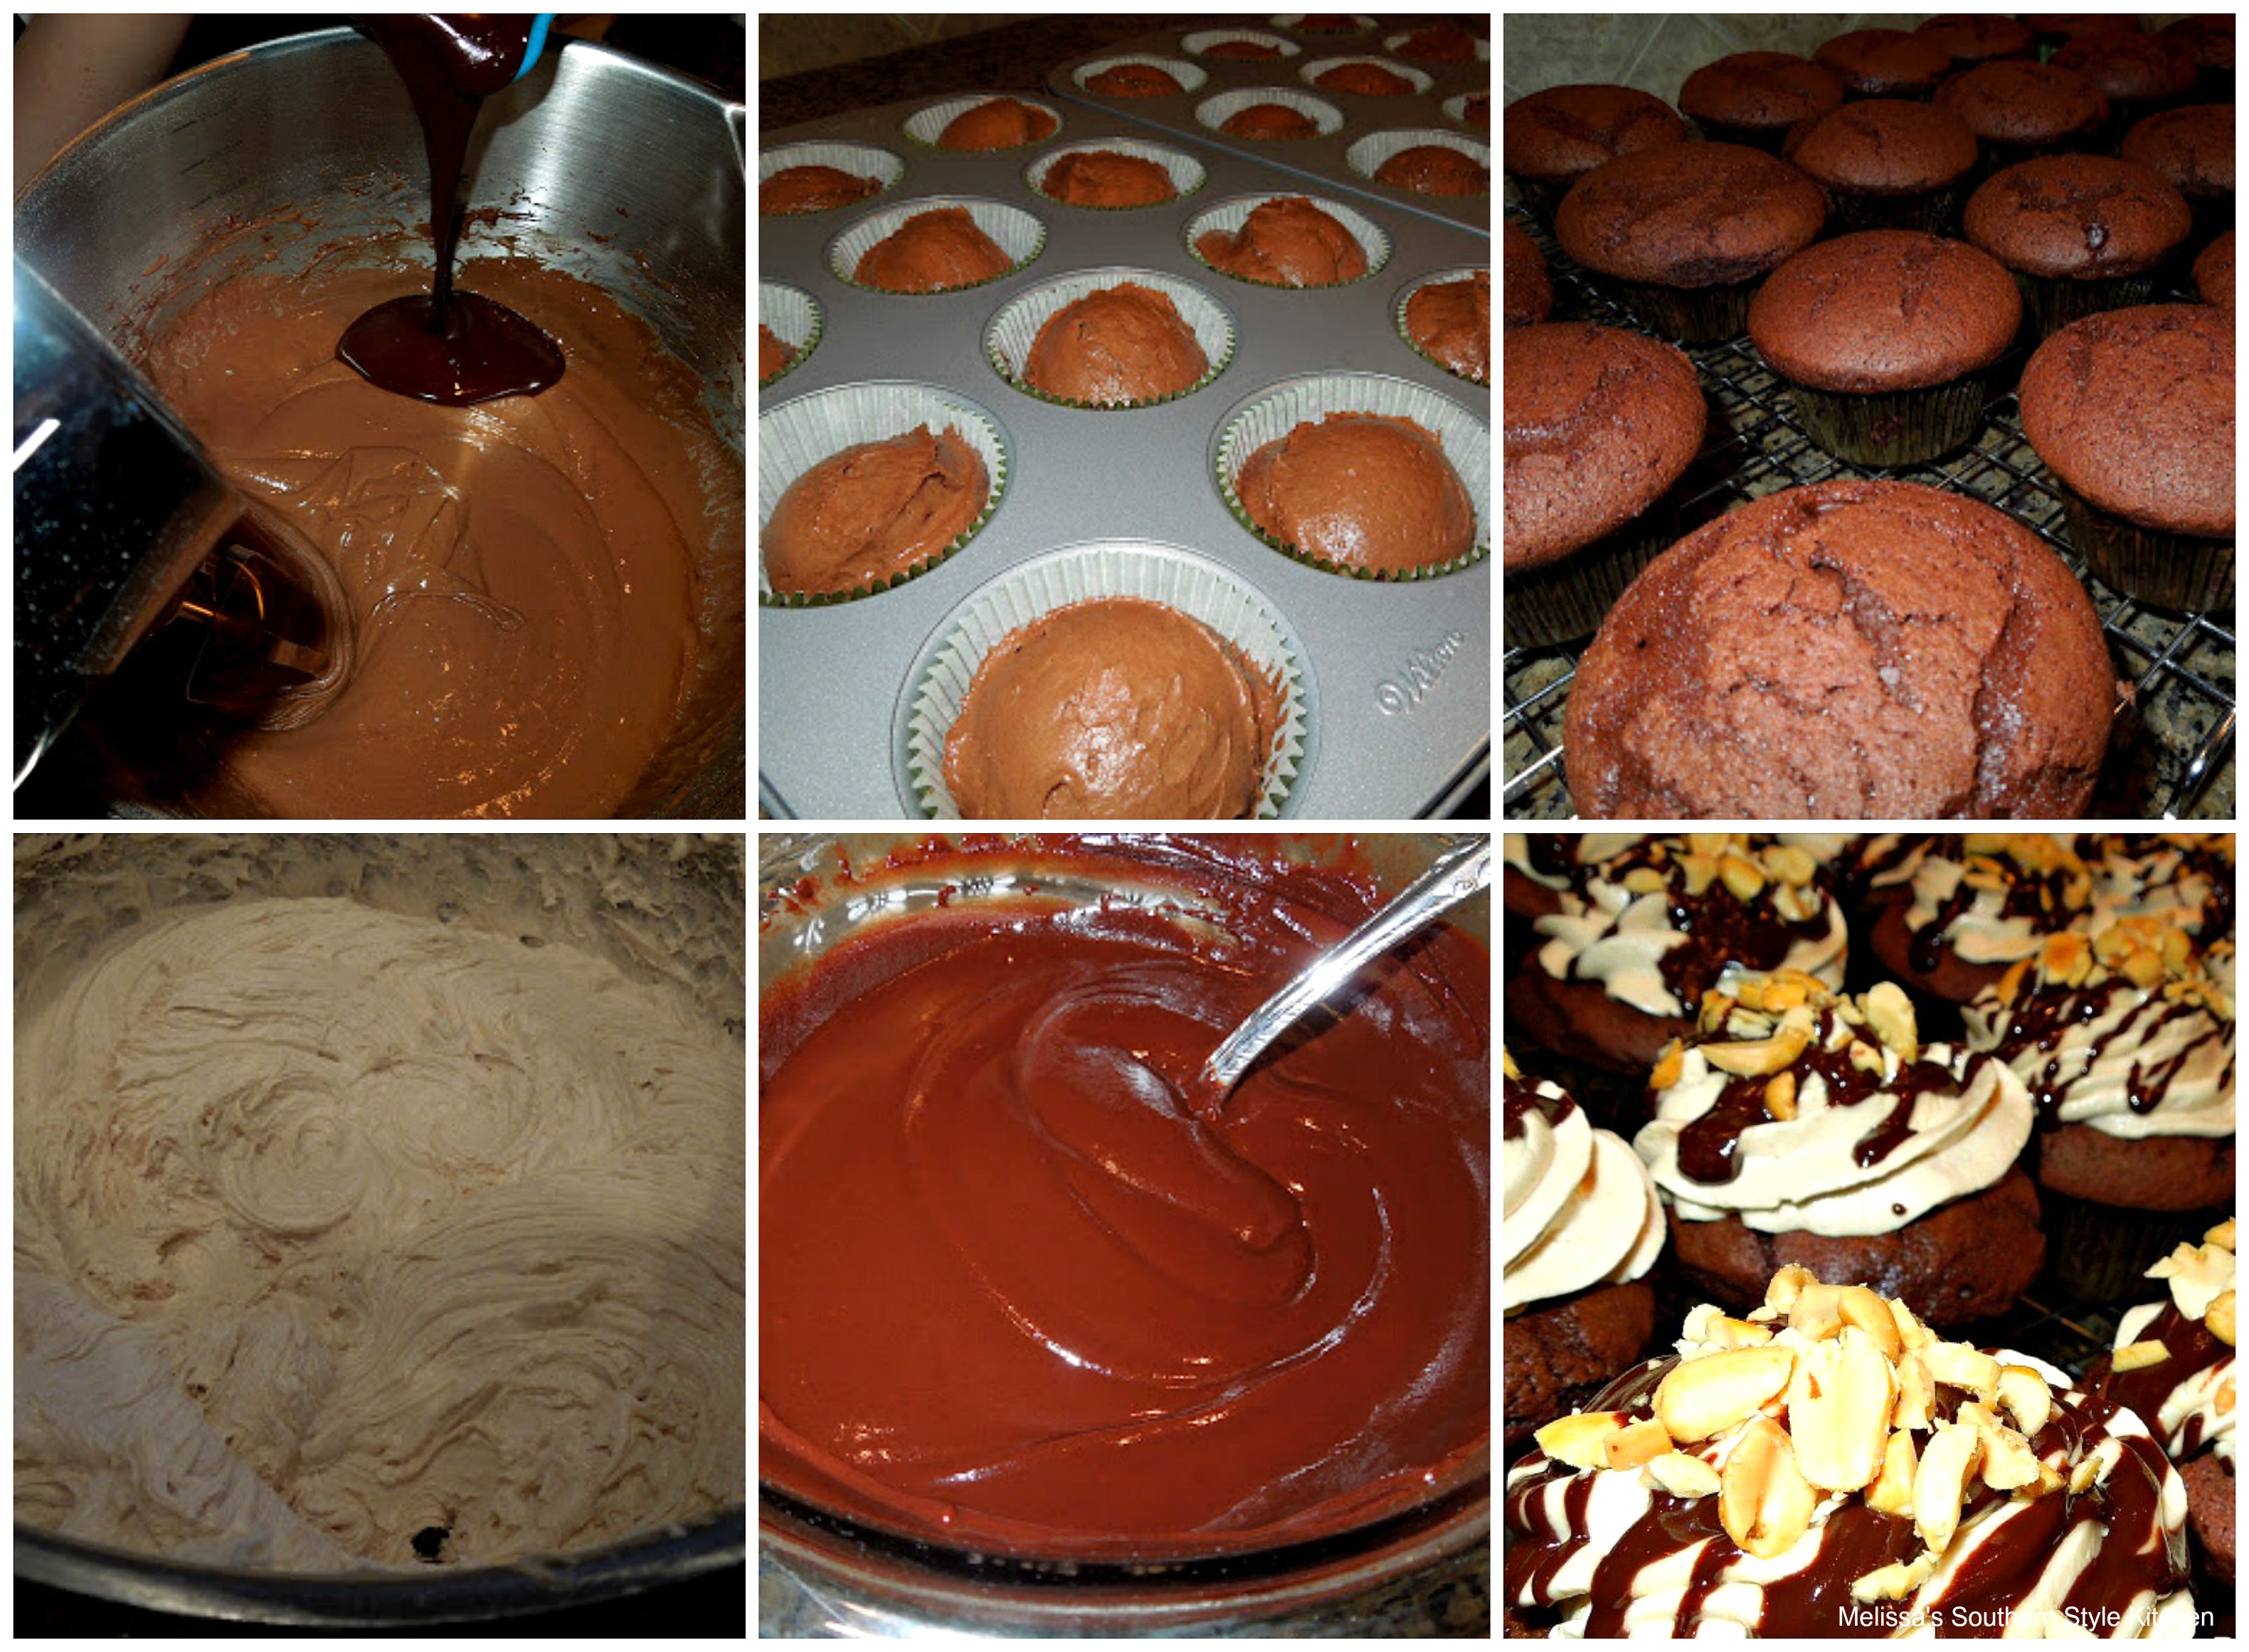 ingredients to make double chocolate cupcakes